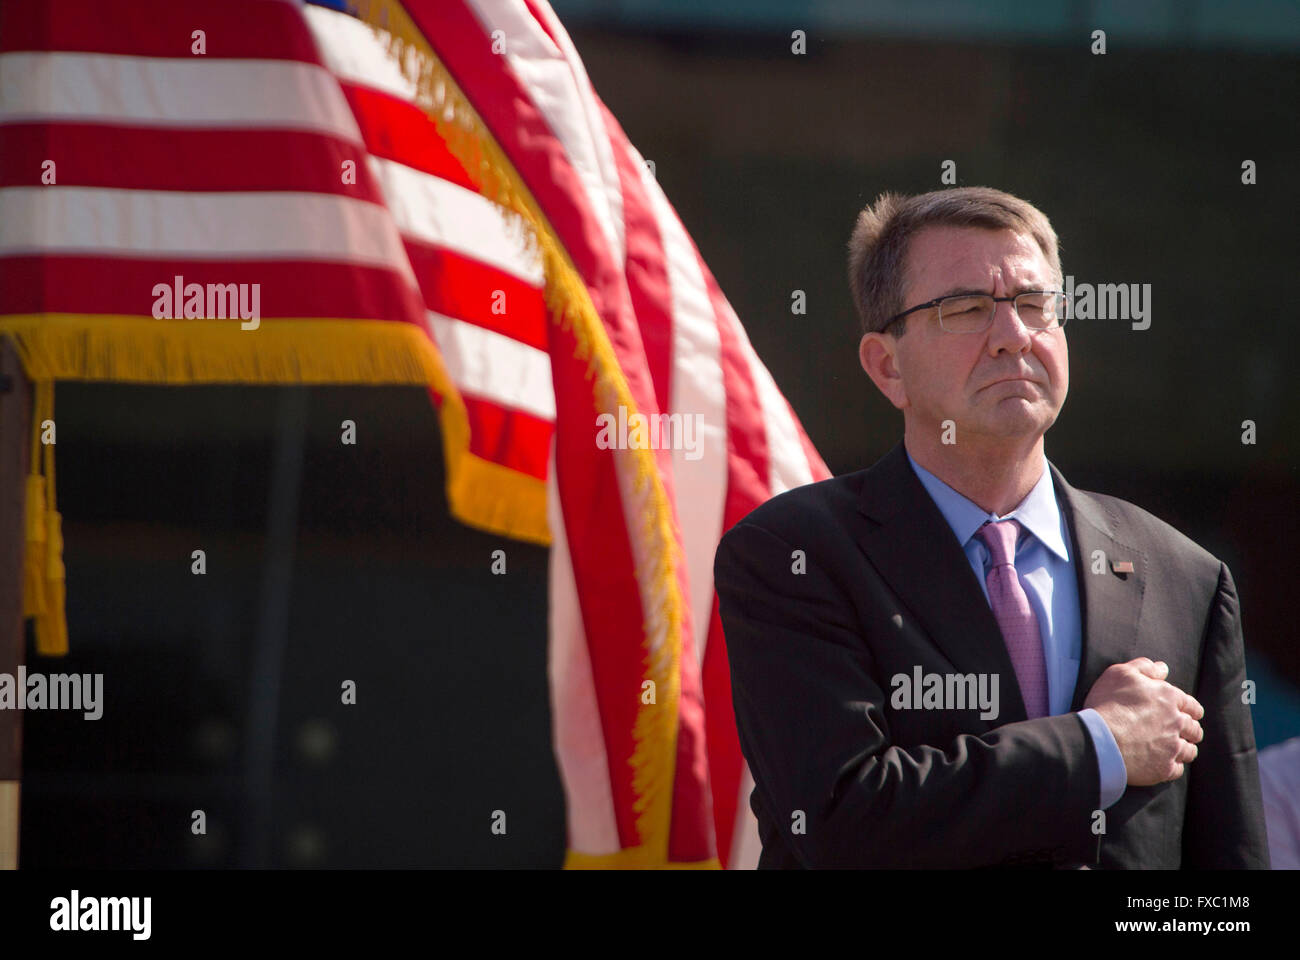 New Delhi, India. 12th April, 2016. U.S Secretary of Defense Ash Carter stands in honor during a repatriation ceremony of U.S service members returned by the Indian government April 13, 2016 in New Dehli, India. The remains are believed to be from a 1940's Army Air Force aircrew crash that occurred in India. Credit:  Planetpix/Alamy Live News Stock Photo